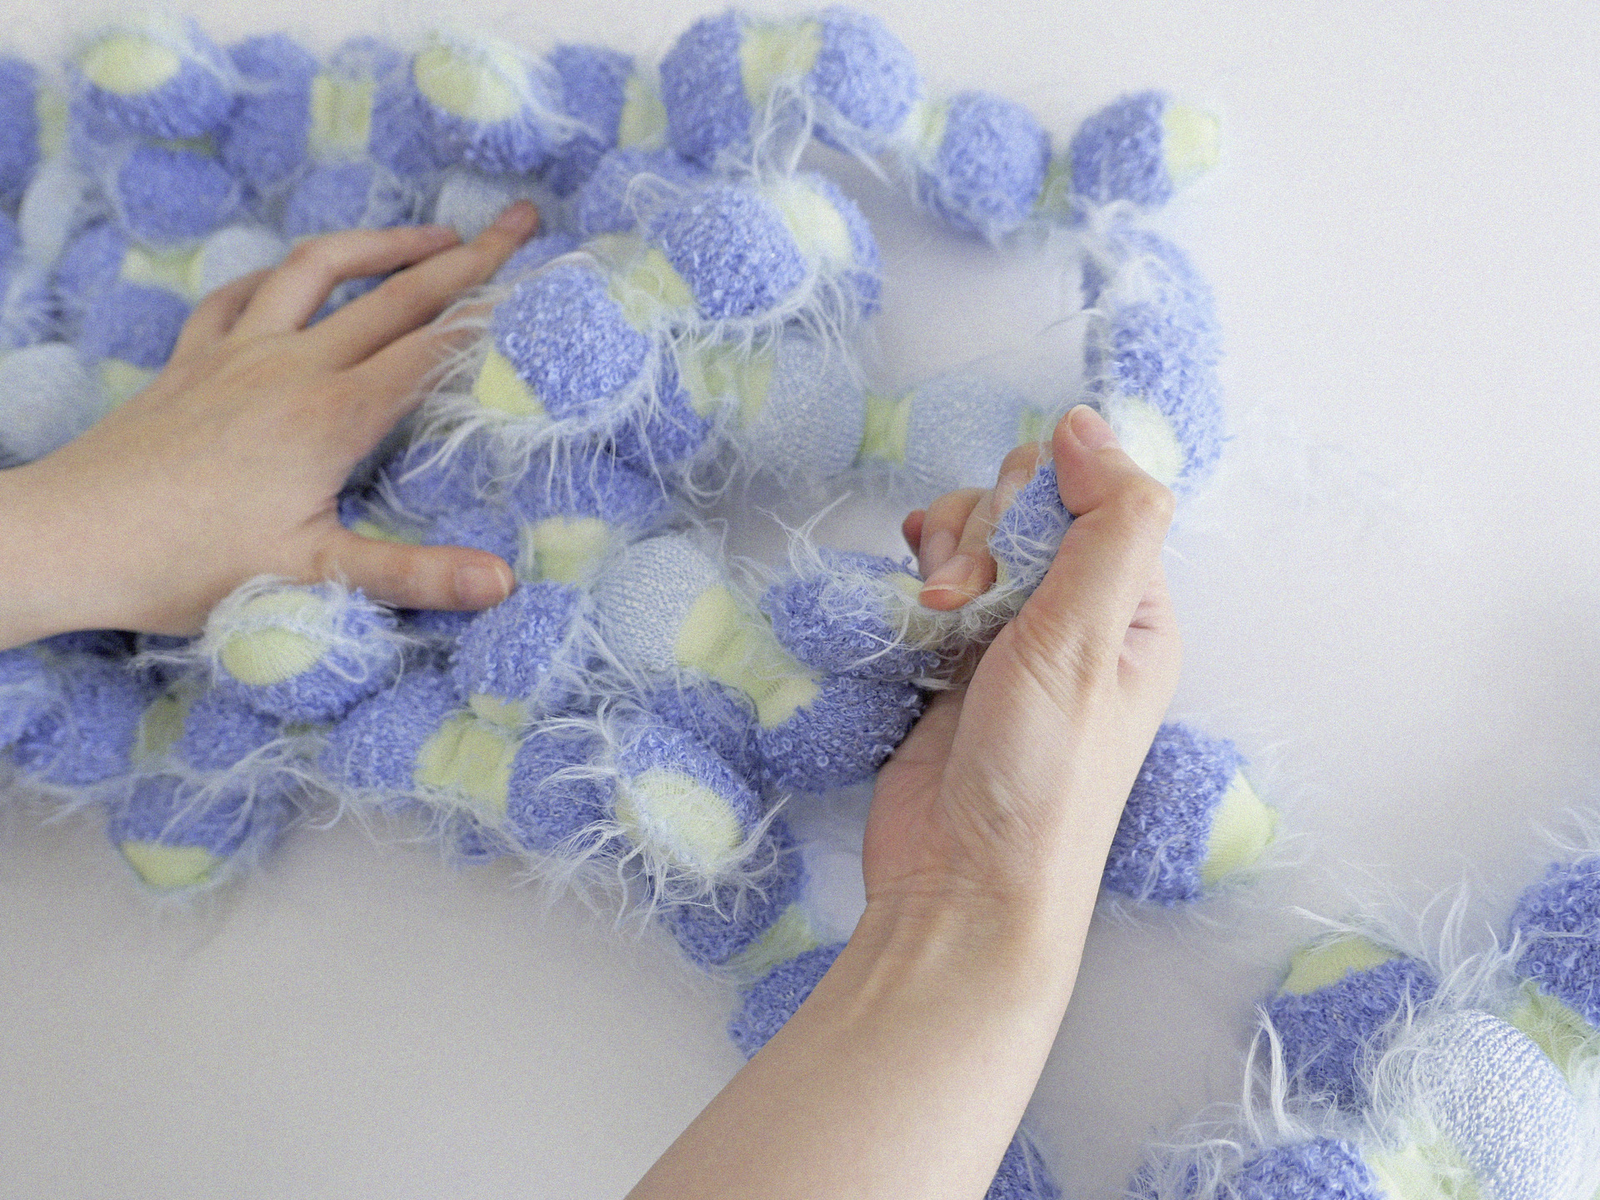 Hands interacting with "Assembly & Sensory" Textiles